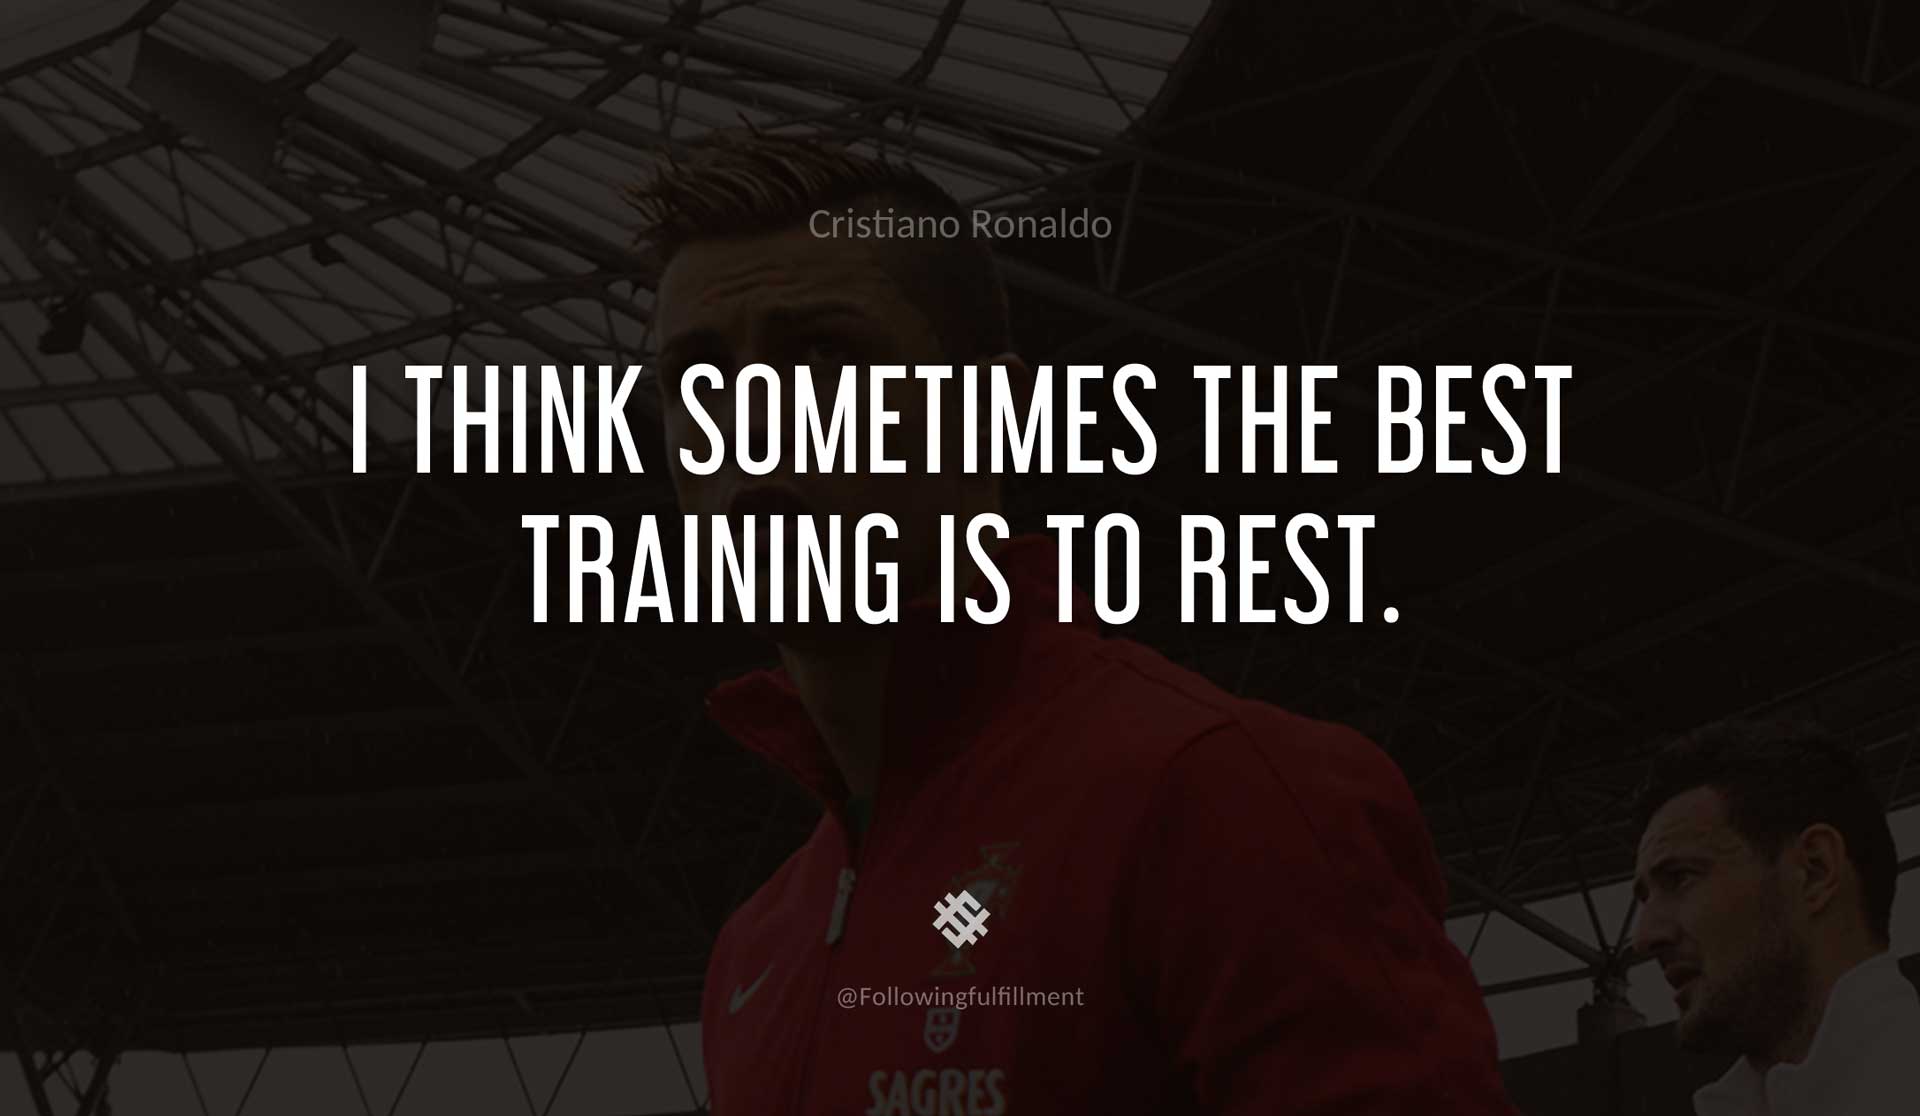 I-think-sometimes-the-best-training-is-to-rest.-CRISTIANO-RONALDO-Quote.jpg